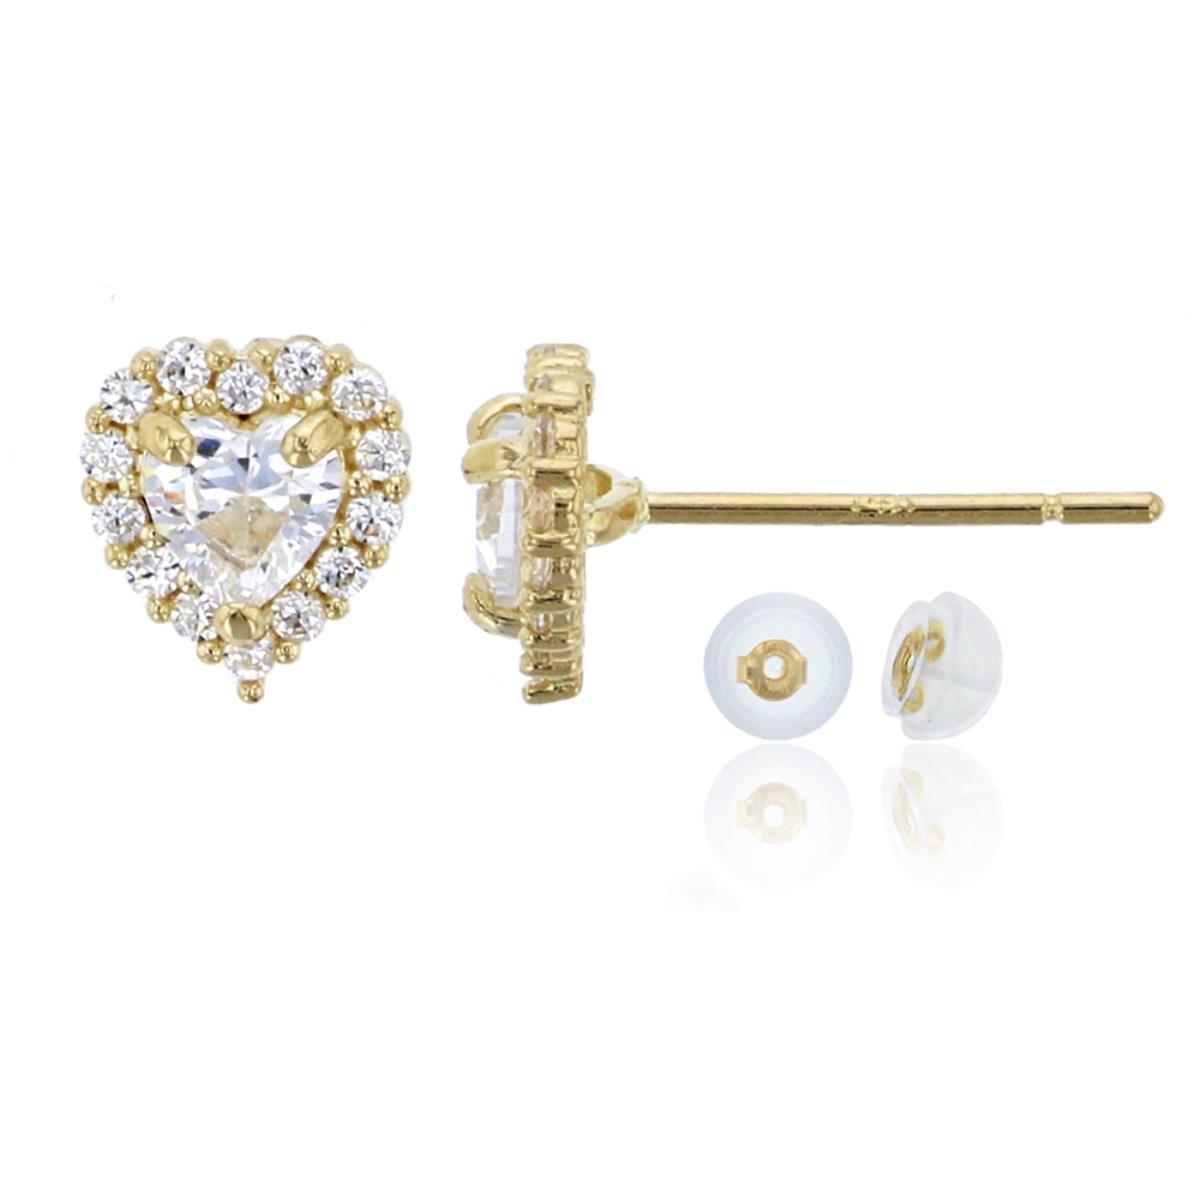 10K Yellow Gold Micropave 3.5mm Heart Cut Halo Stud & 10K Silicone Back